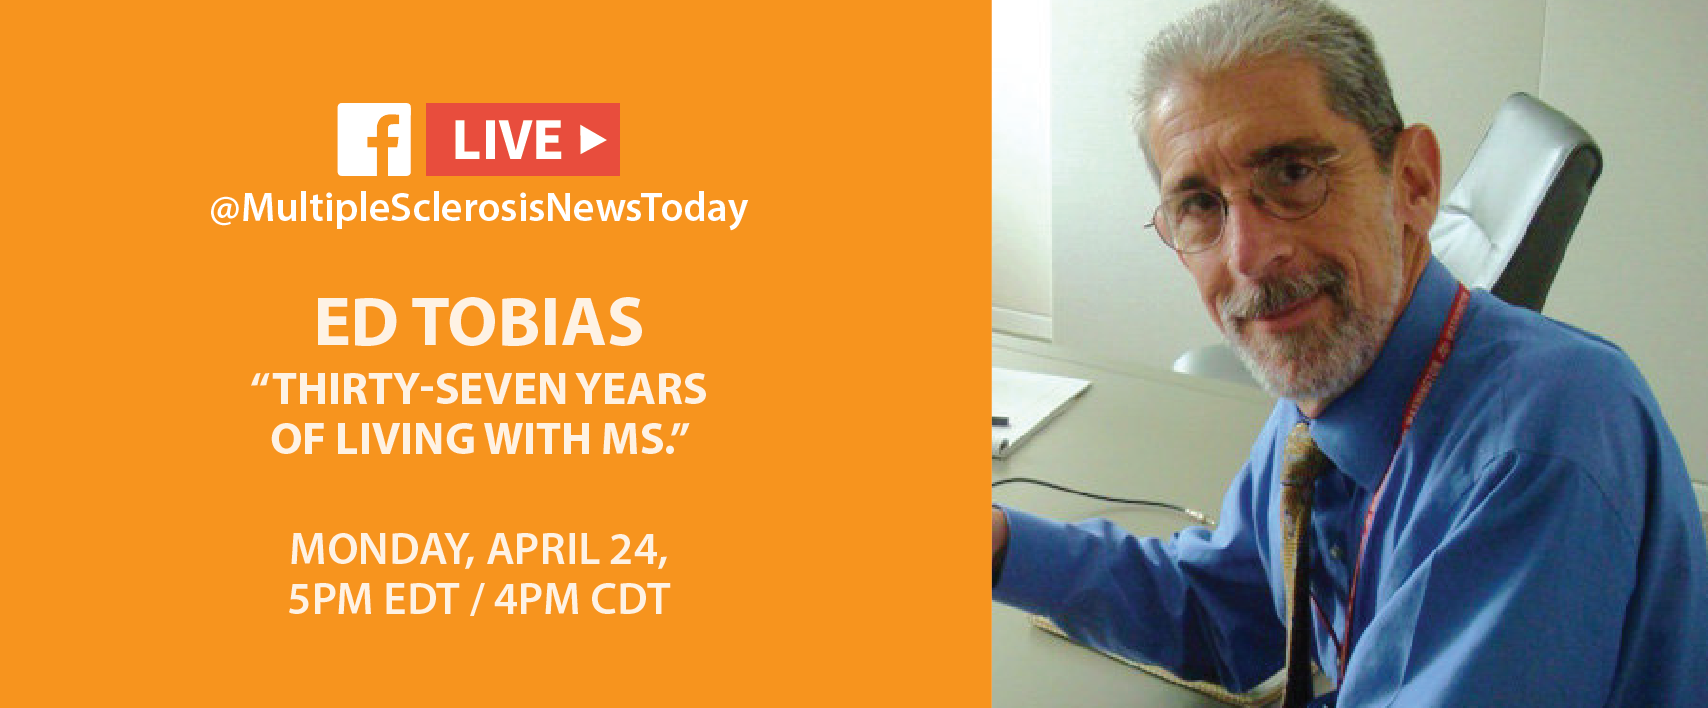 I’m Talking About MS Live on Facebook!